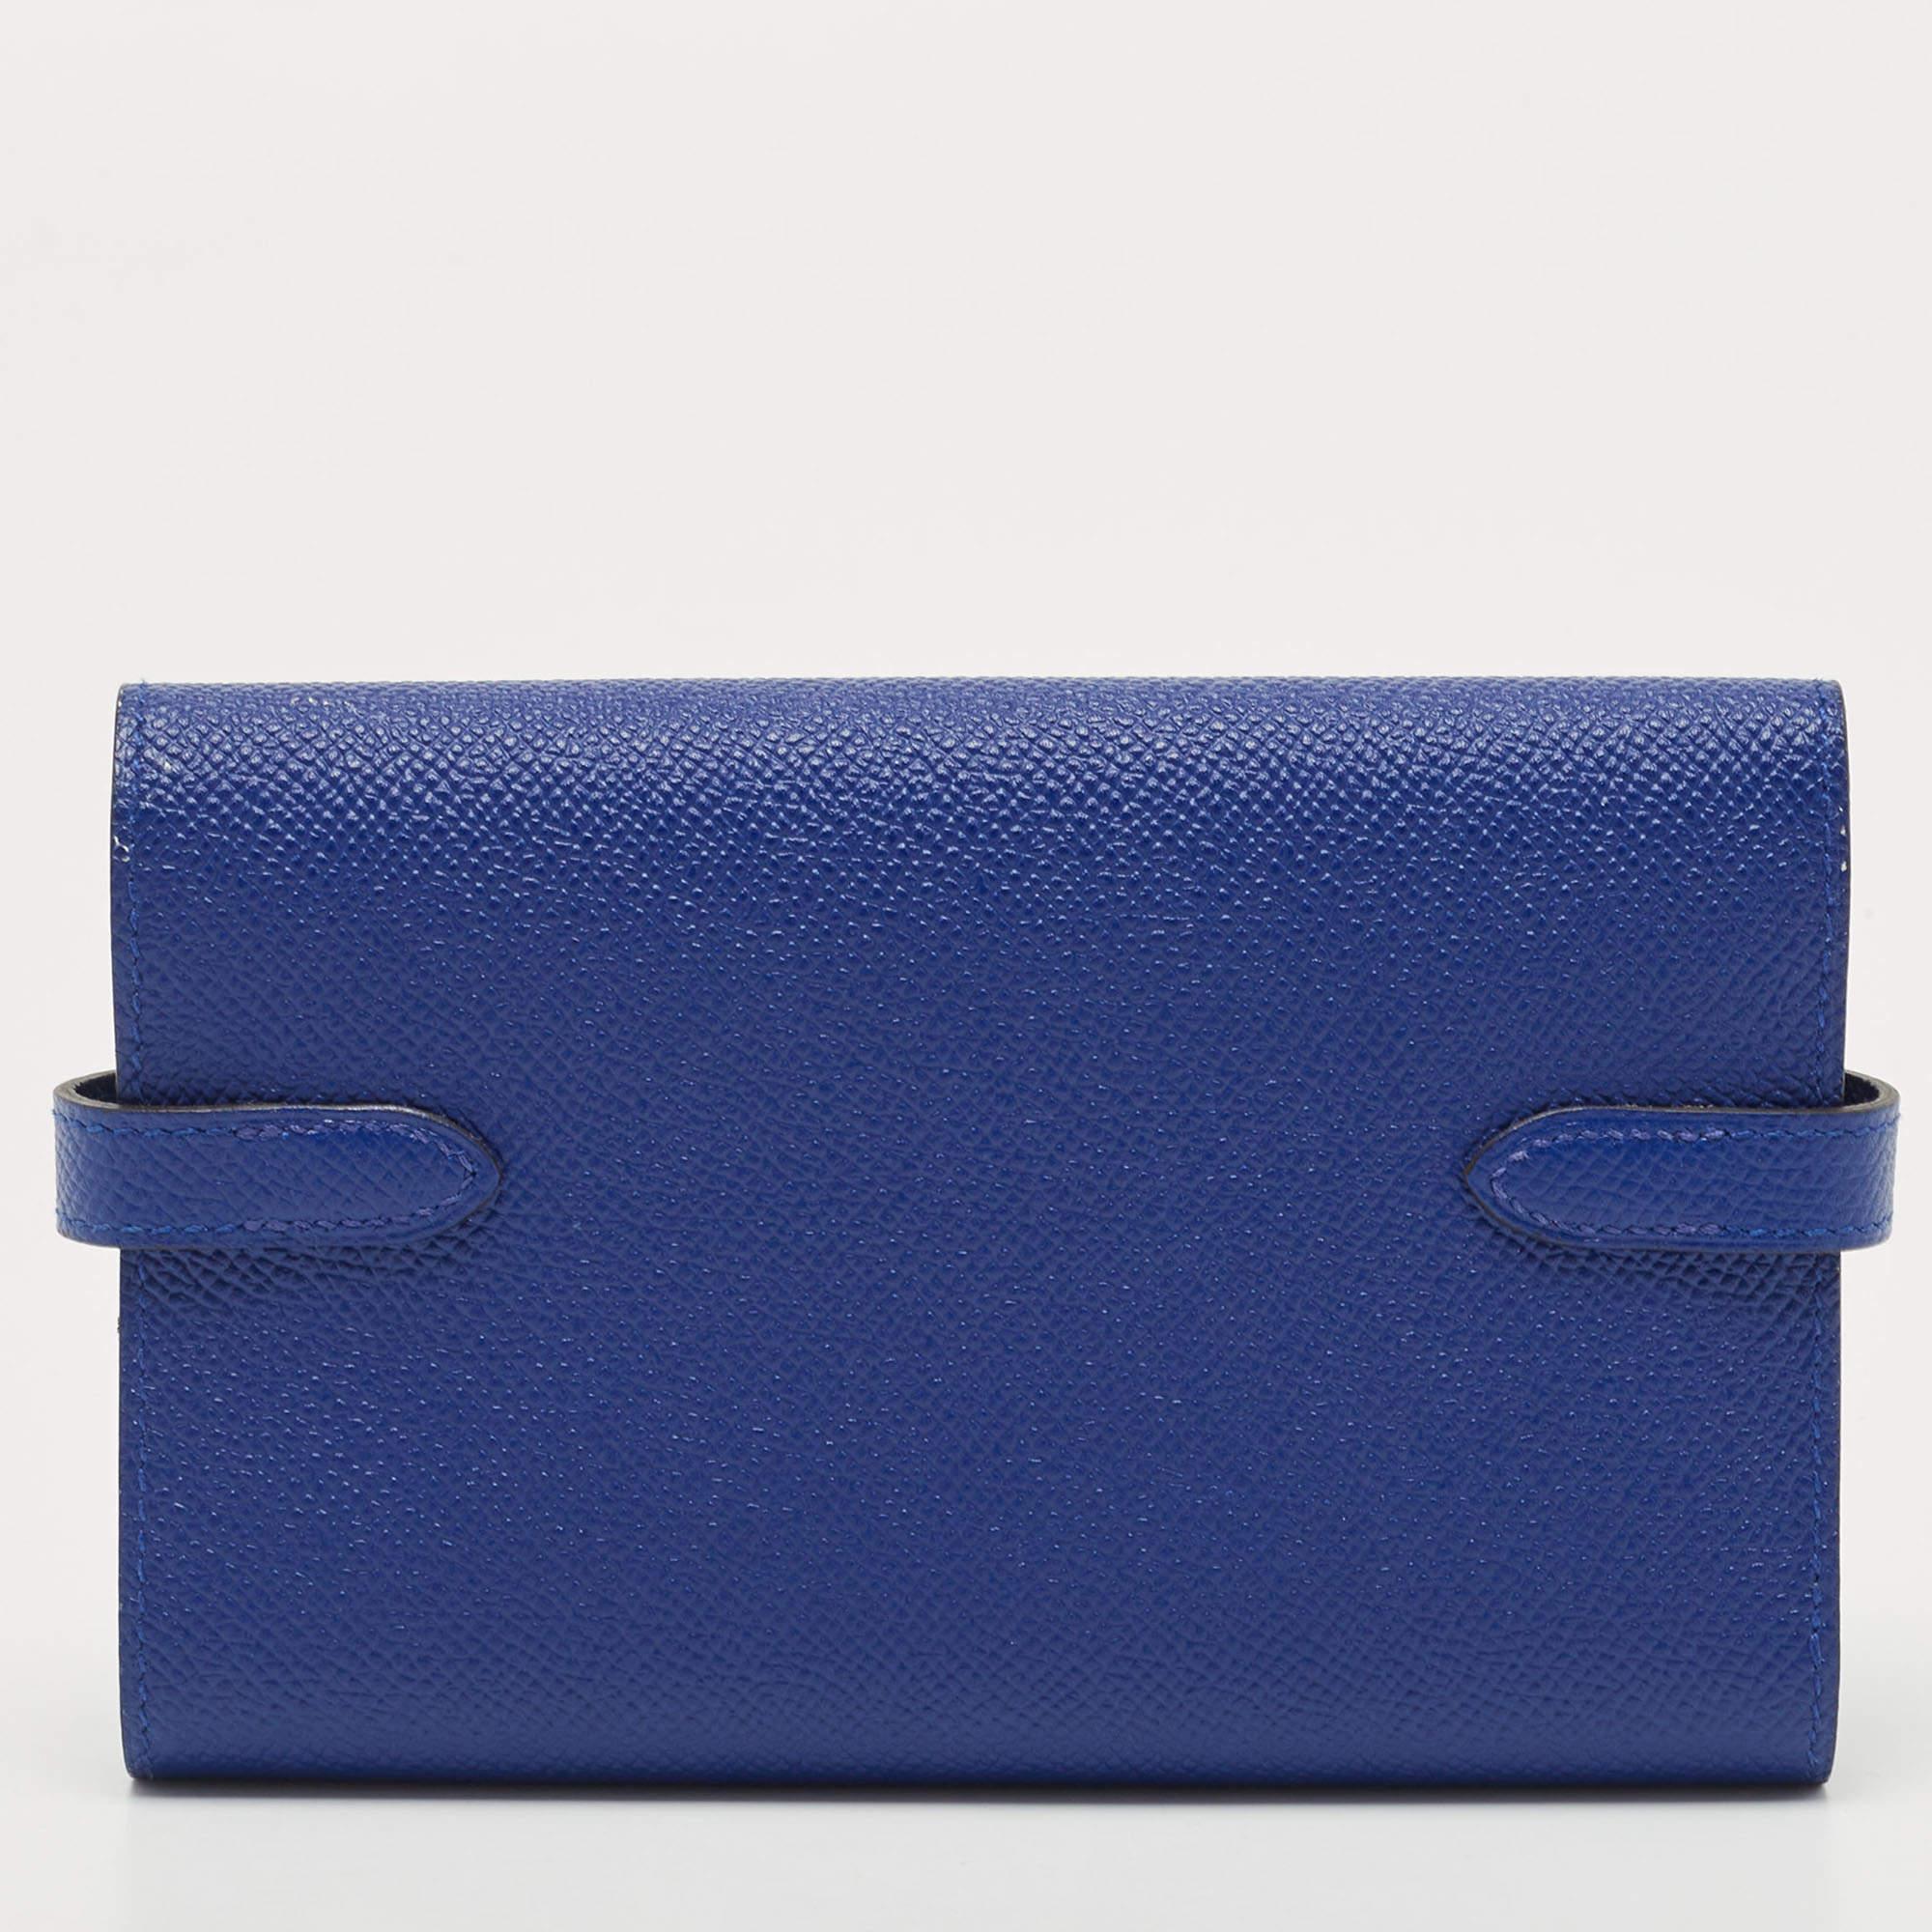 The Hermès Kelly Depliant wallet is a sophisticated and luxurious accessory. Crafted from exquisite Epsom leather in a striking electric blue hue, this wallet exudes elegance. Its Kelly-inspired design showcases a fold-over flap and a sleek, compact